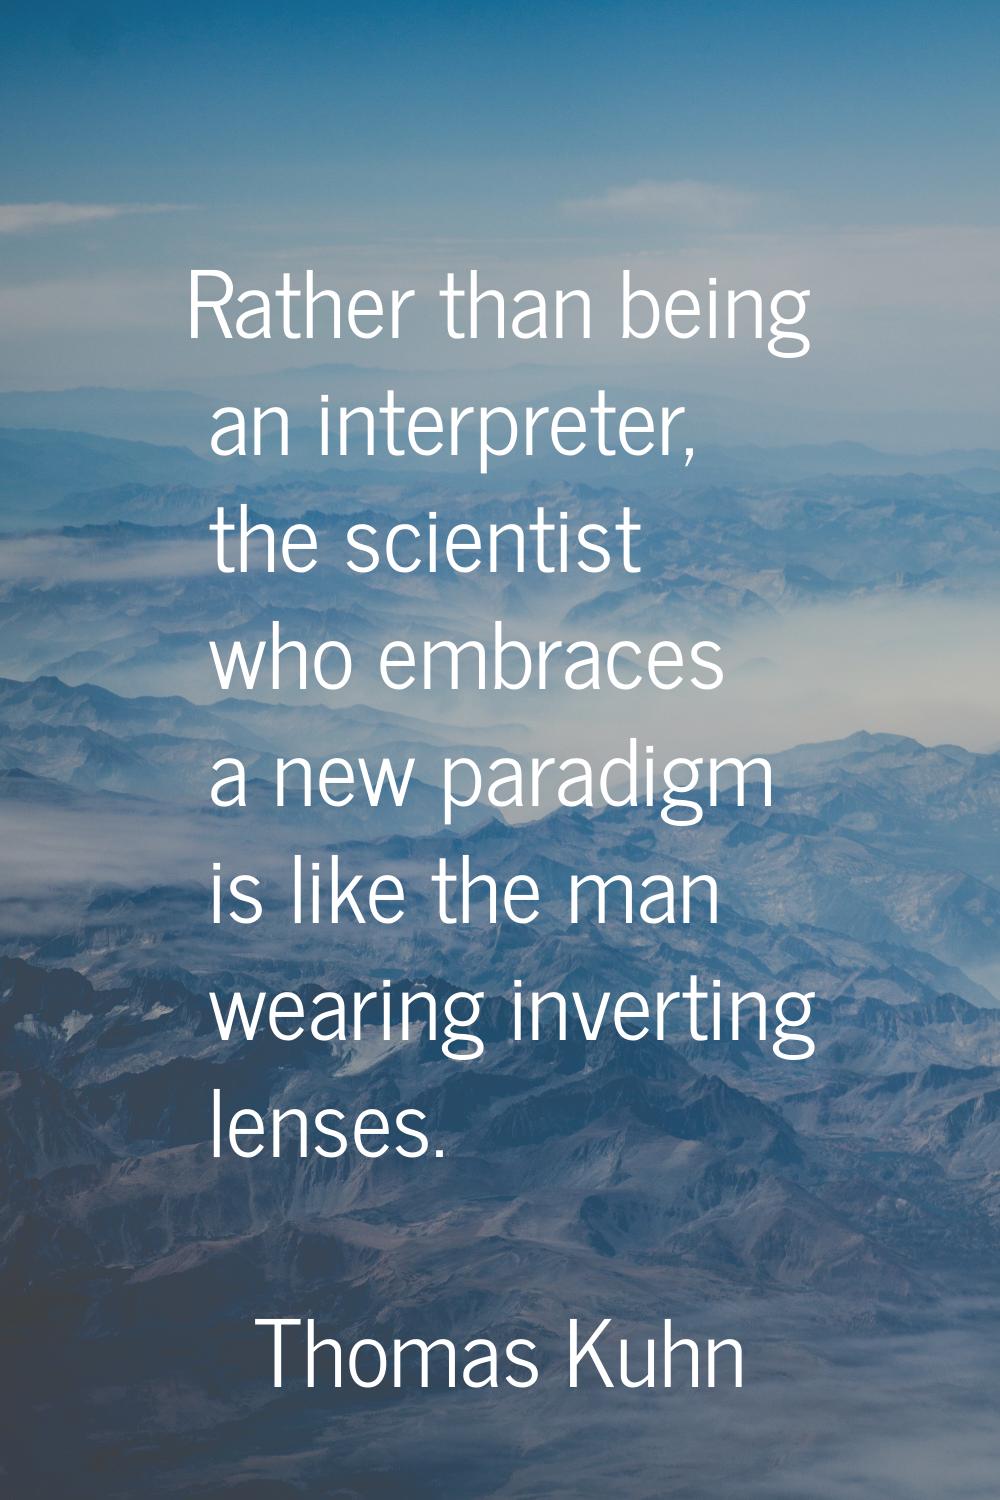 Rather than being an interpreter, the scientist who embraces a new paradigm is like the man wearing